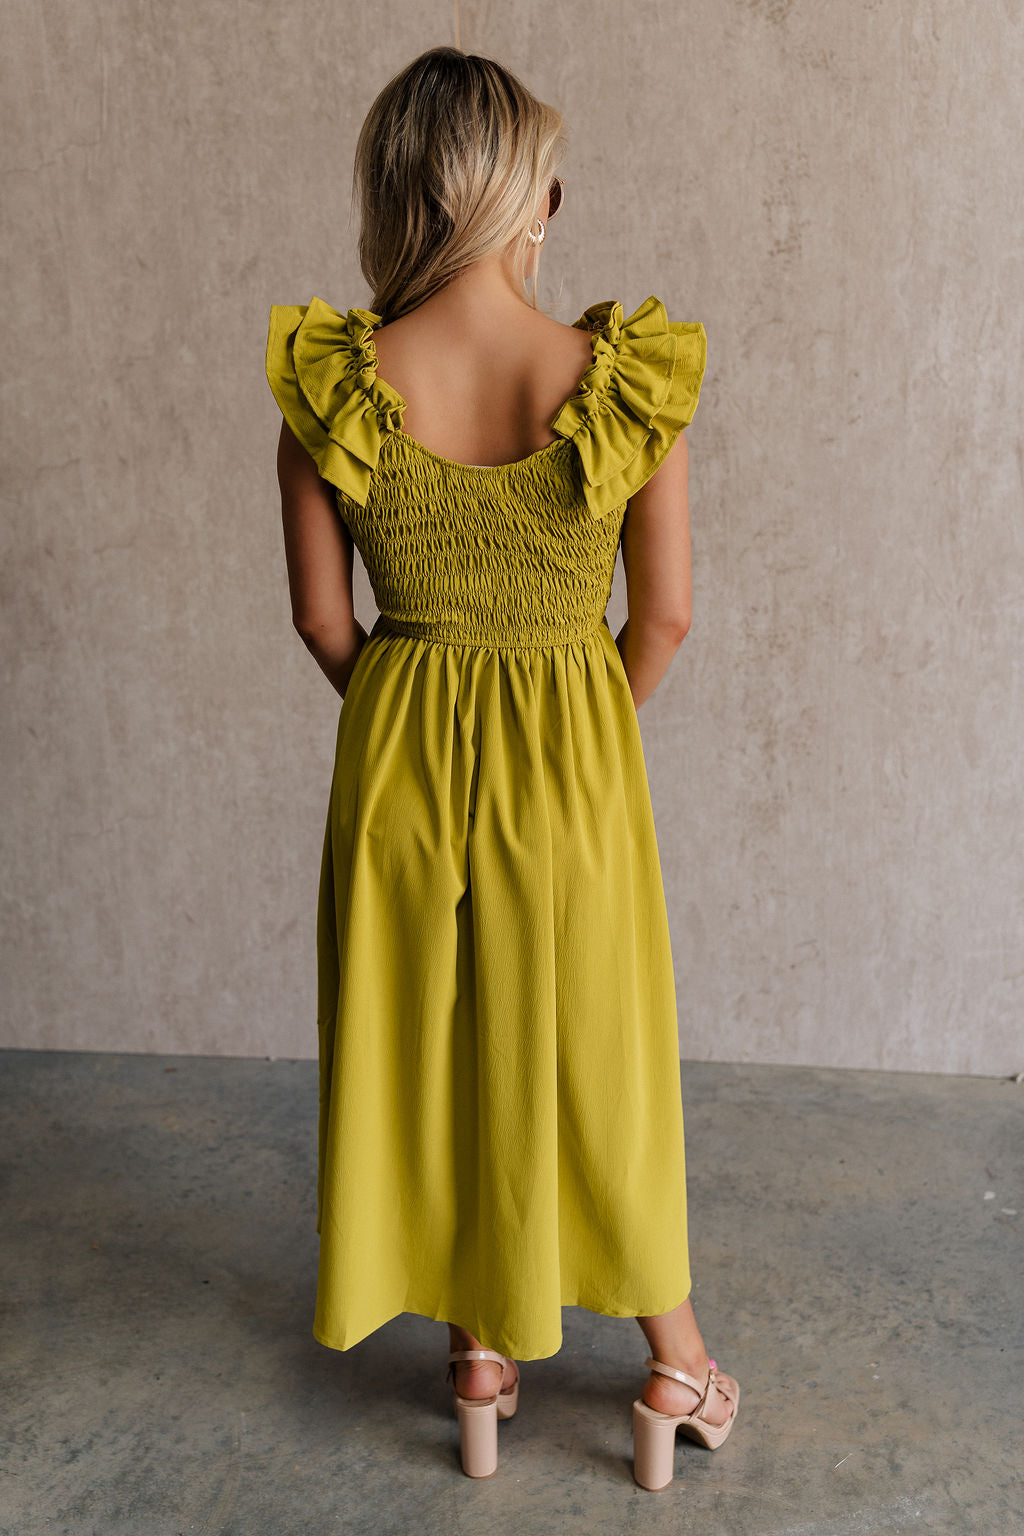 Upper body back view of female model wearing the Kristina Chartreuse Smocked Sleeveless Midi Dress that has chartreuse fabric with a smocked upper, ruffle straps, and a midi length hem.